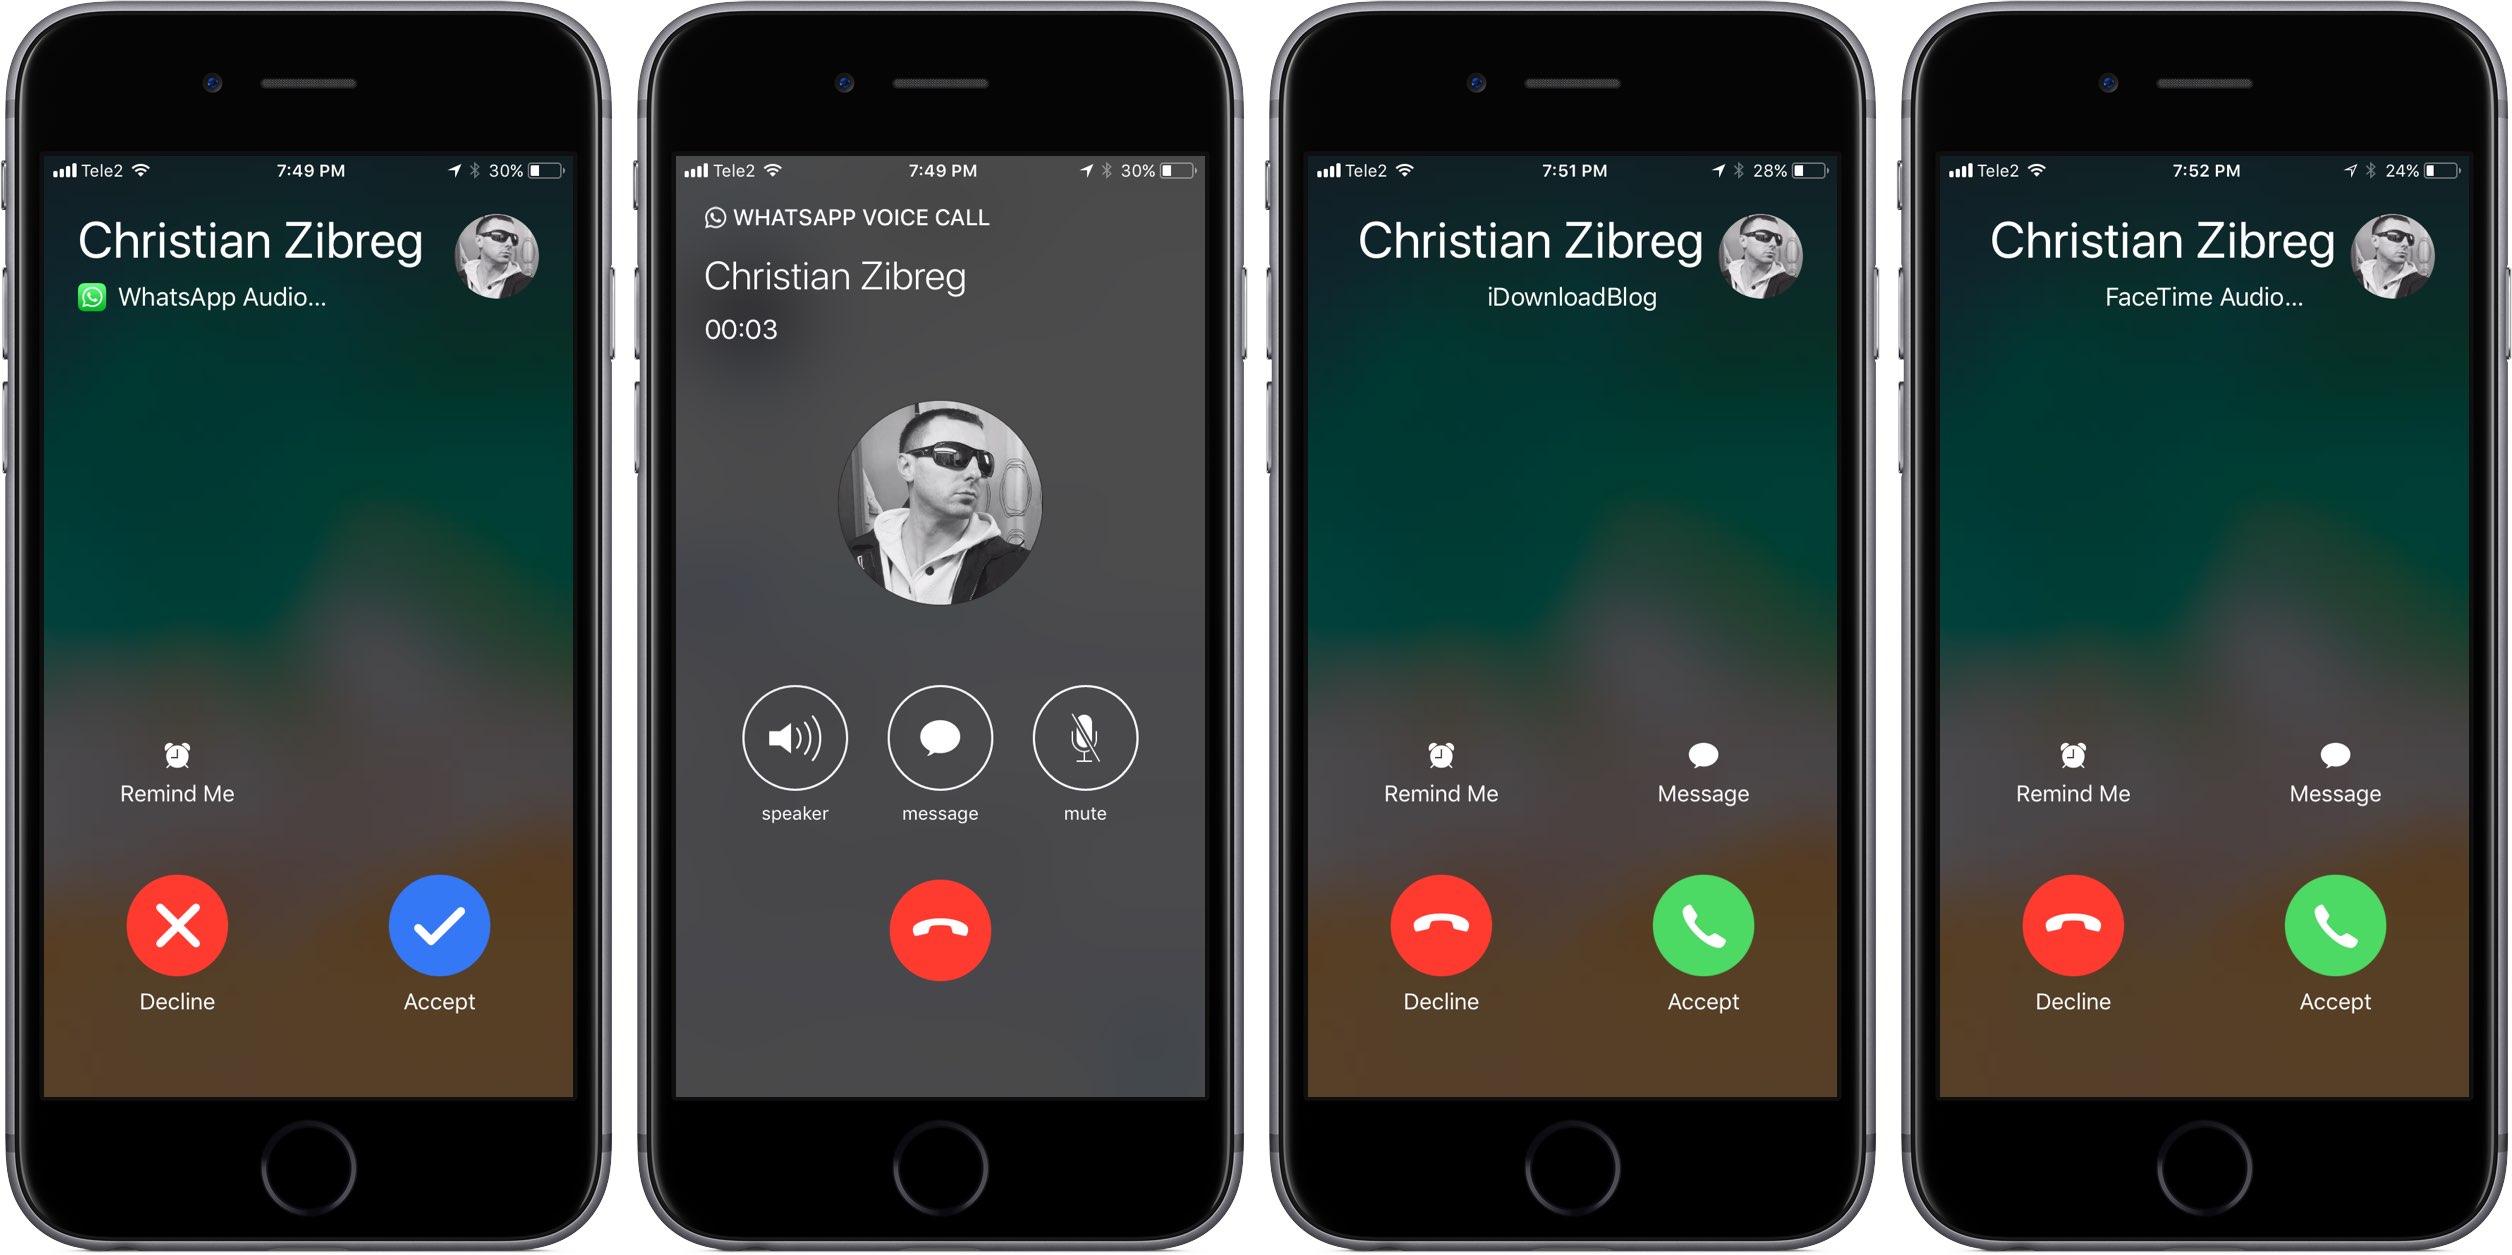 How To Set Iphone To Automatically Answer Calls